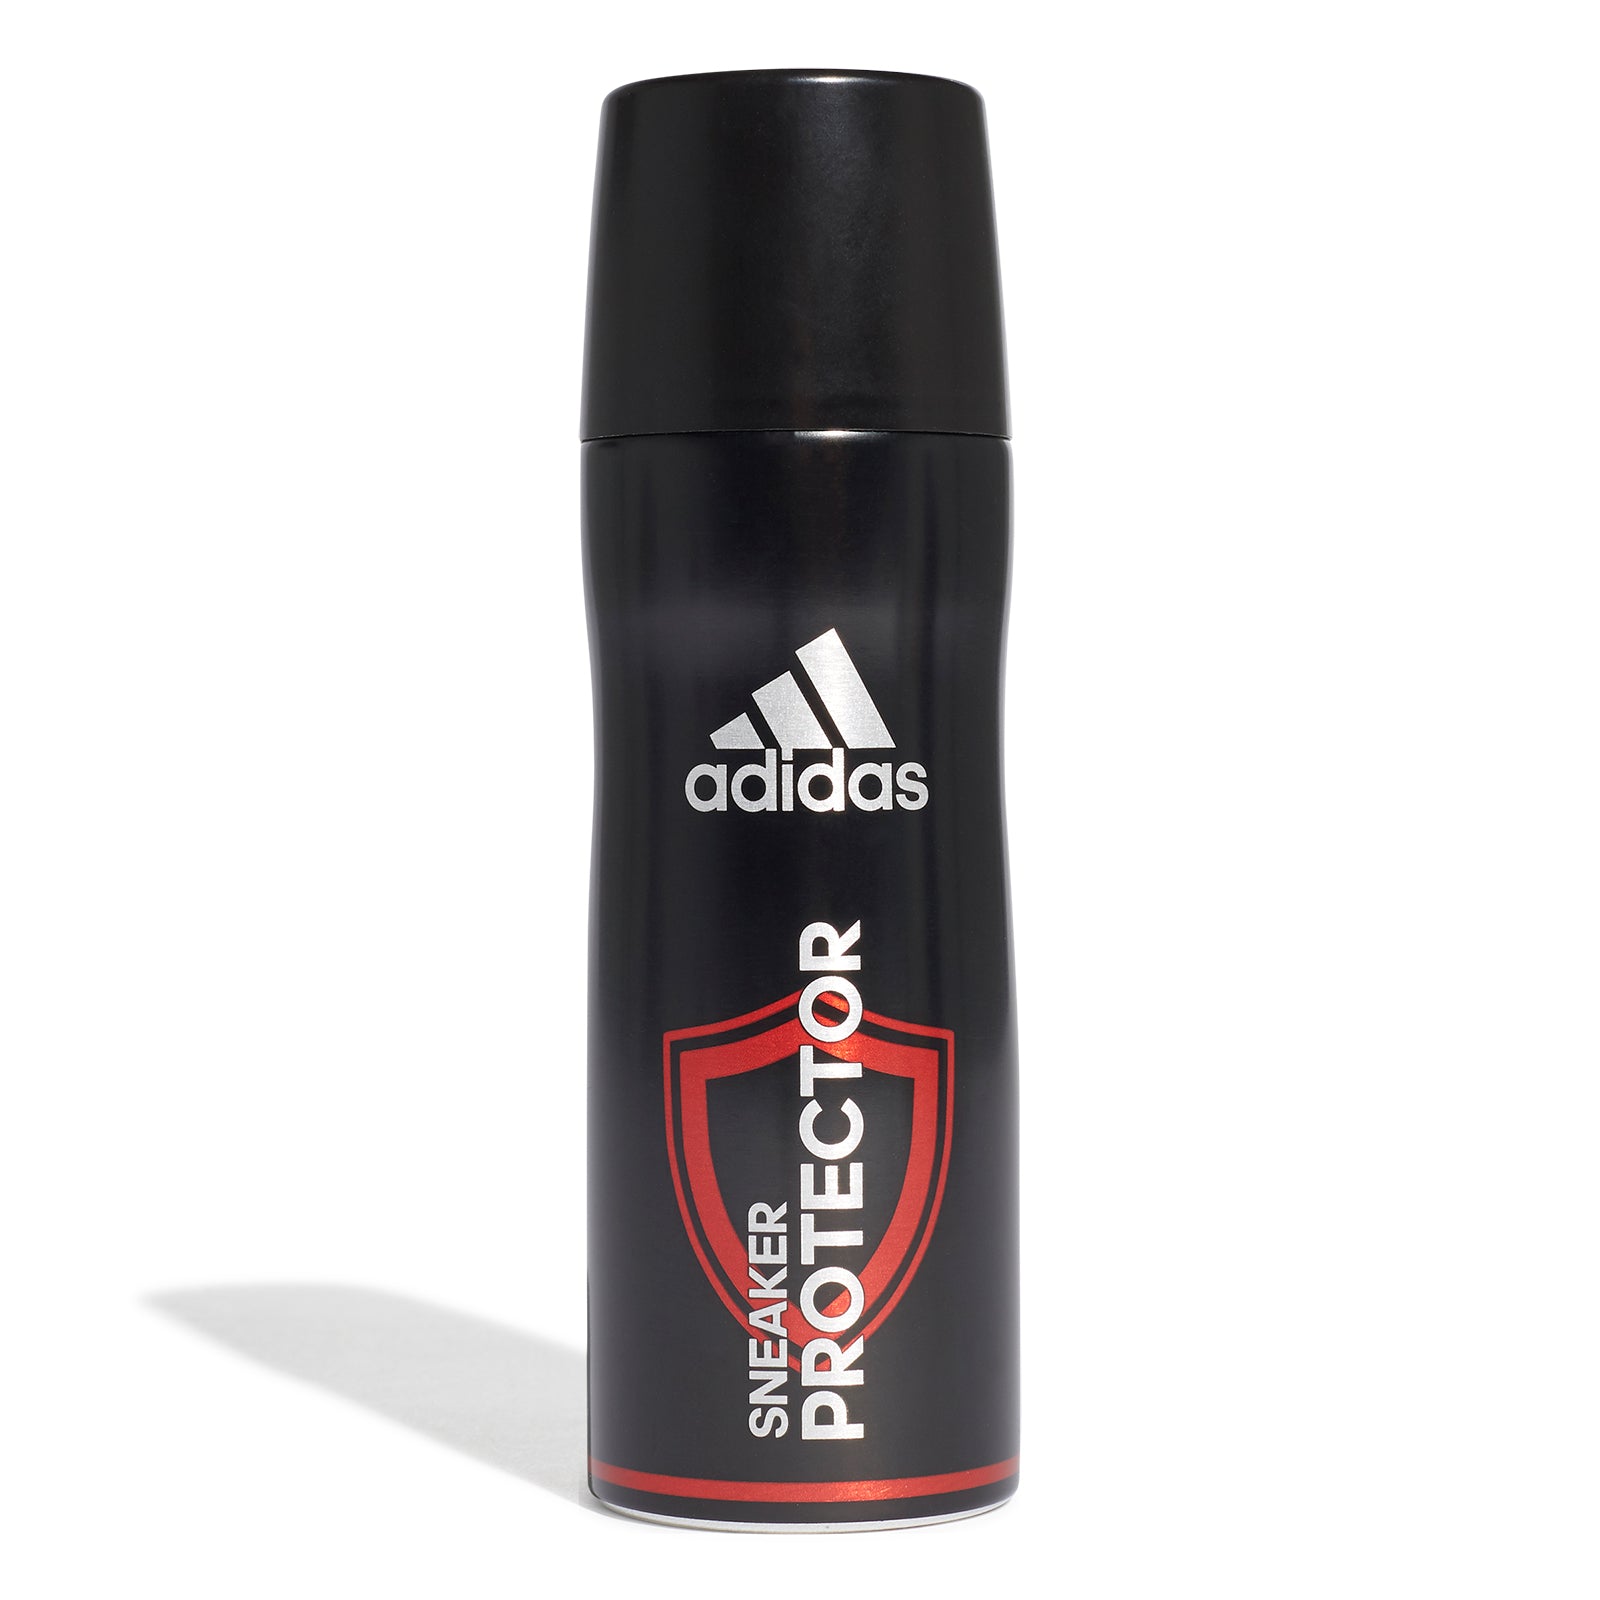 Sneakers protector spray. Against water, snow and dirt